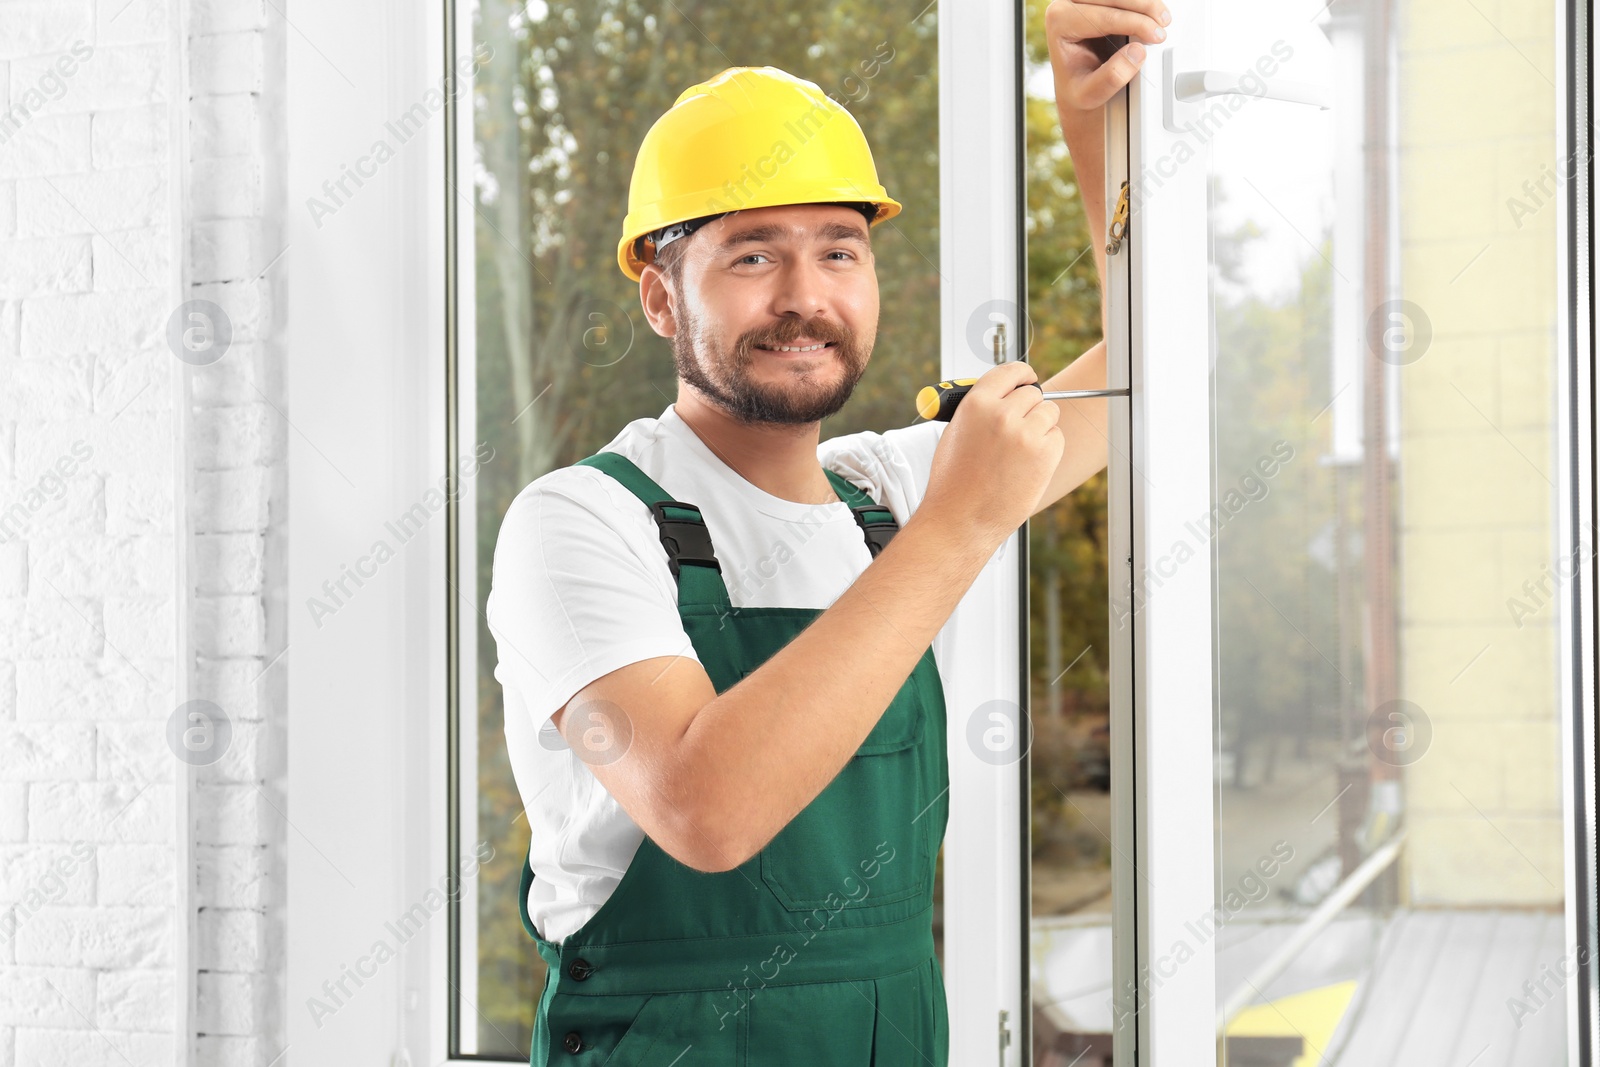 Photo of Construction worker installing new window in house